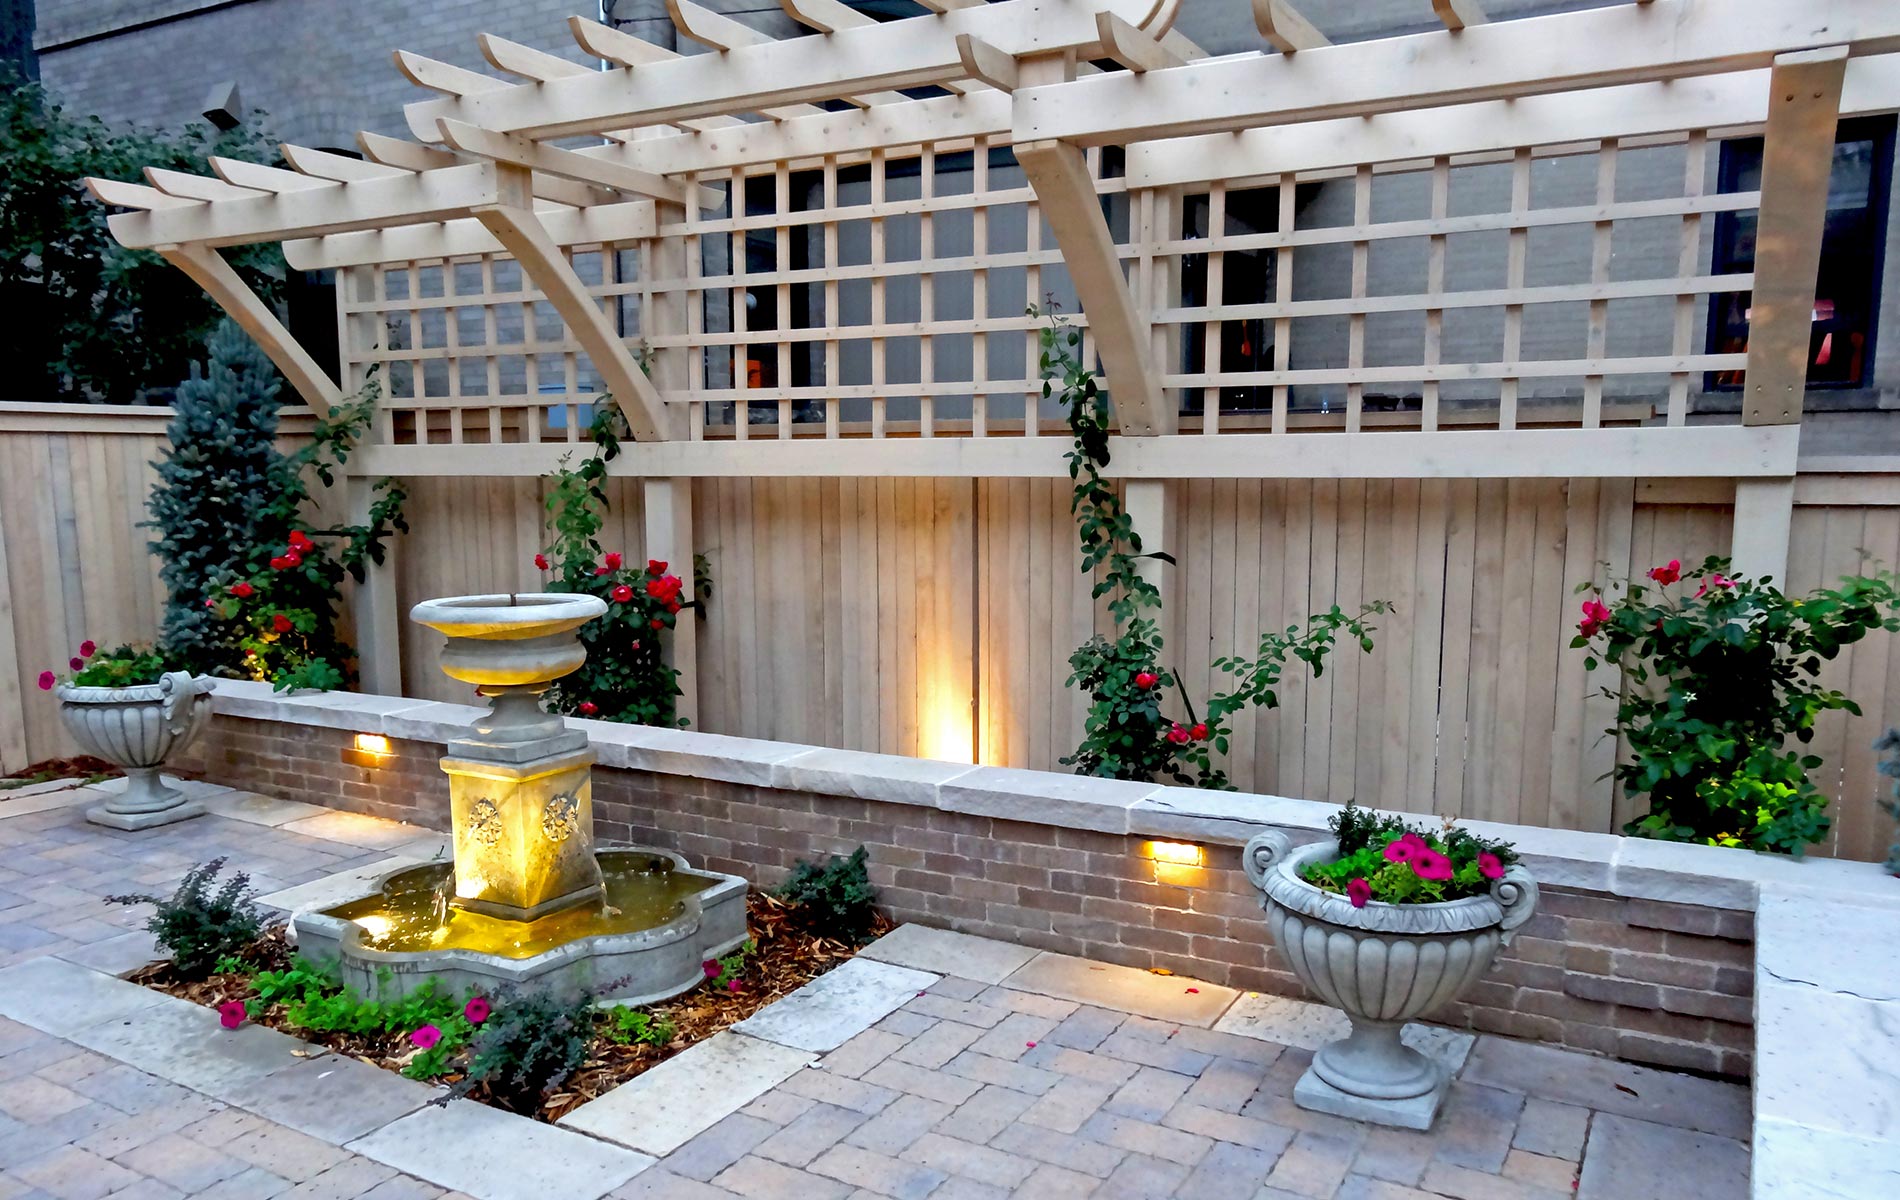 Ornate Wood Trellis, Brick Seat Wall, Paver Patio and Fountain in Historical House Courtyard Landscaped with Grand Architecture Mile High Landscaping in Denver